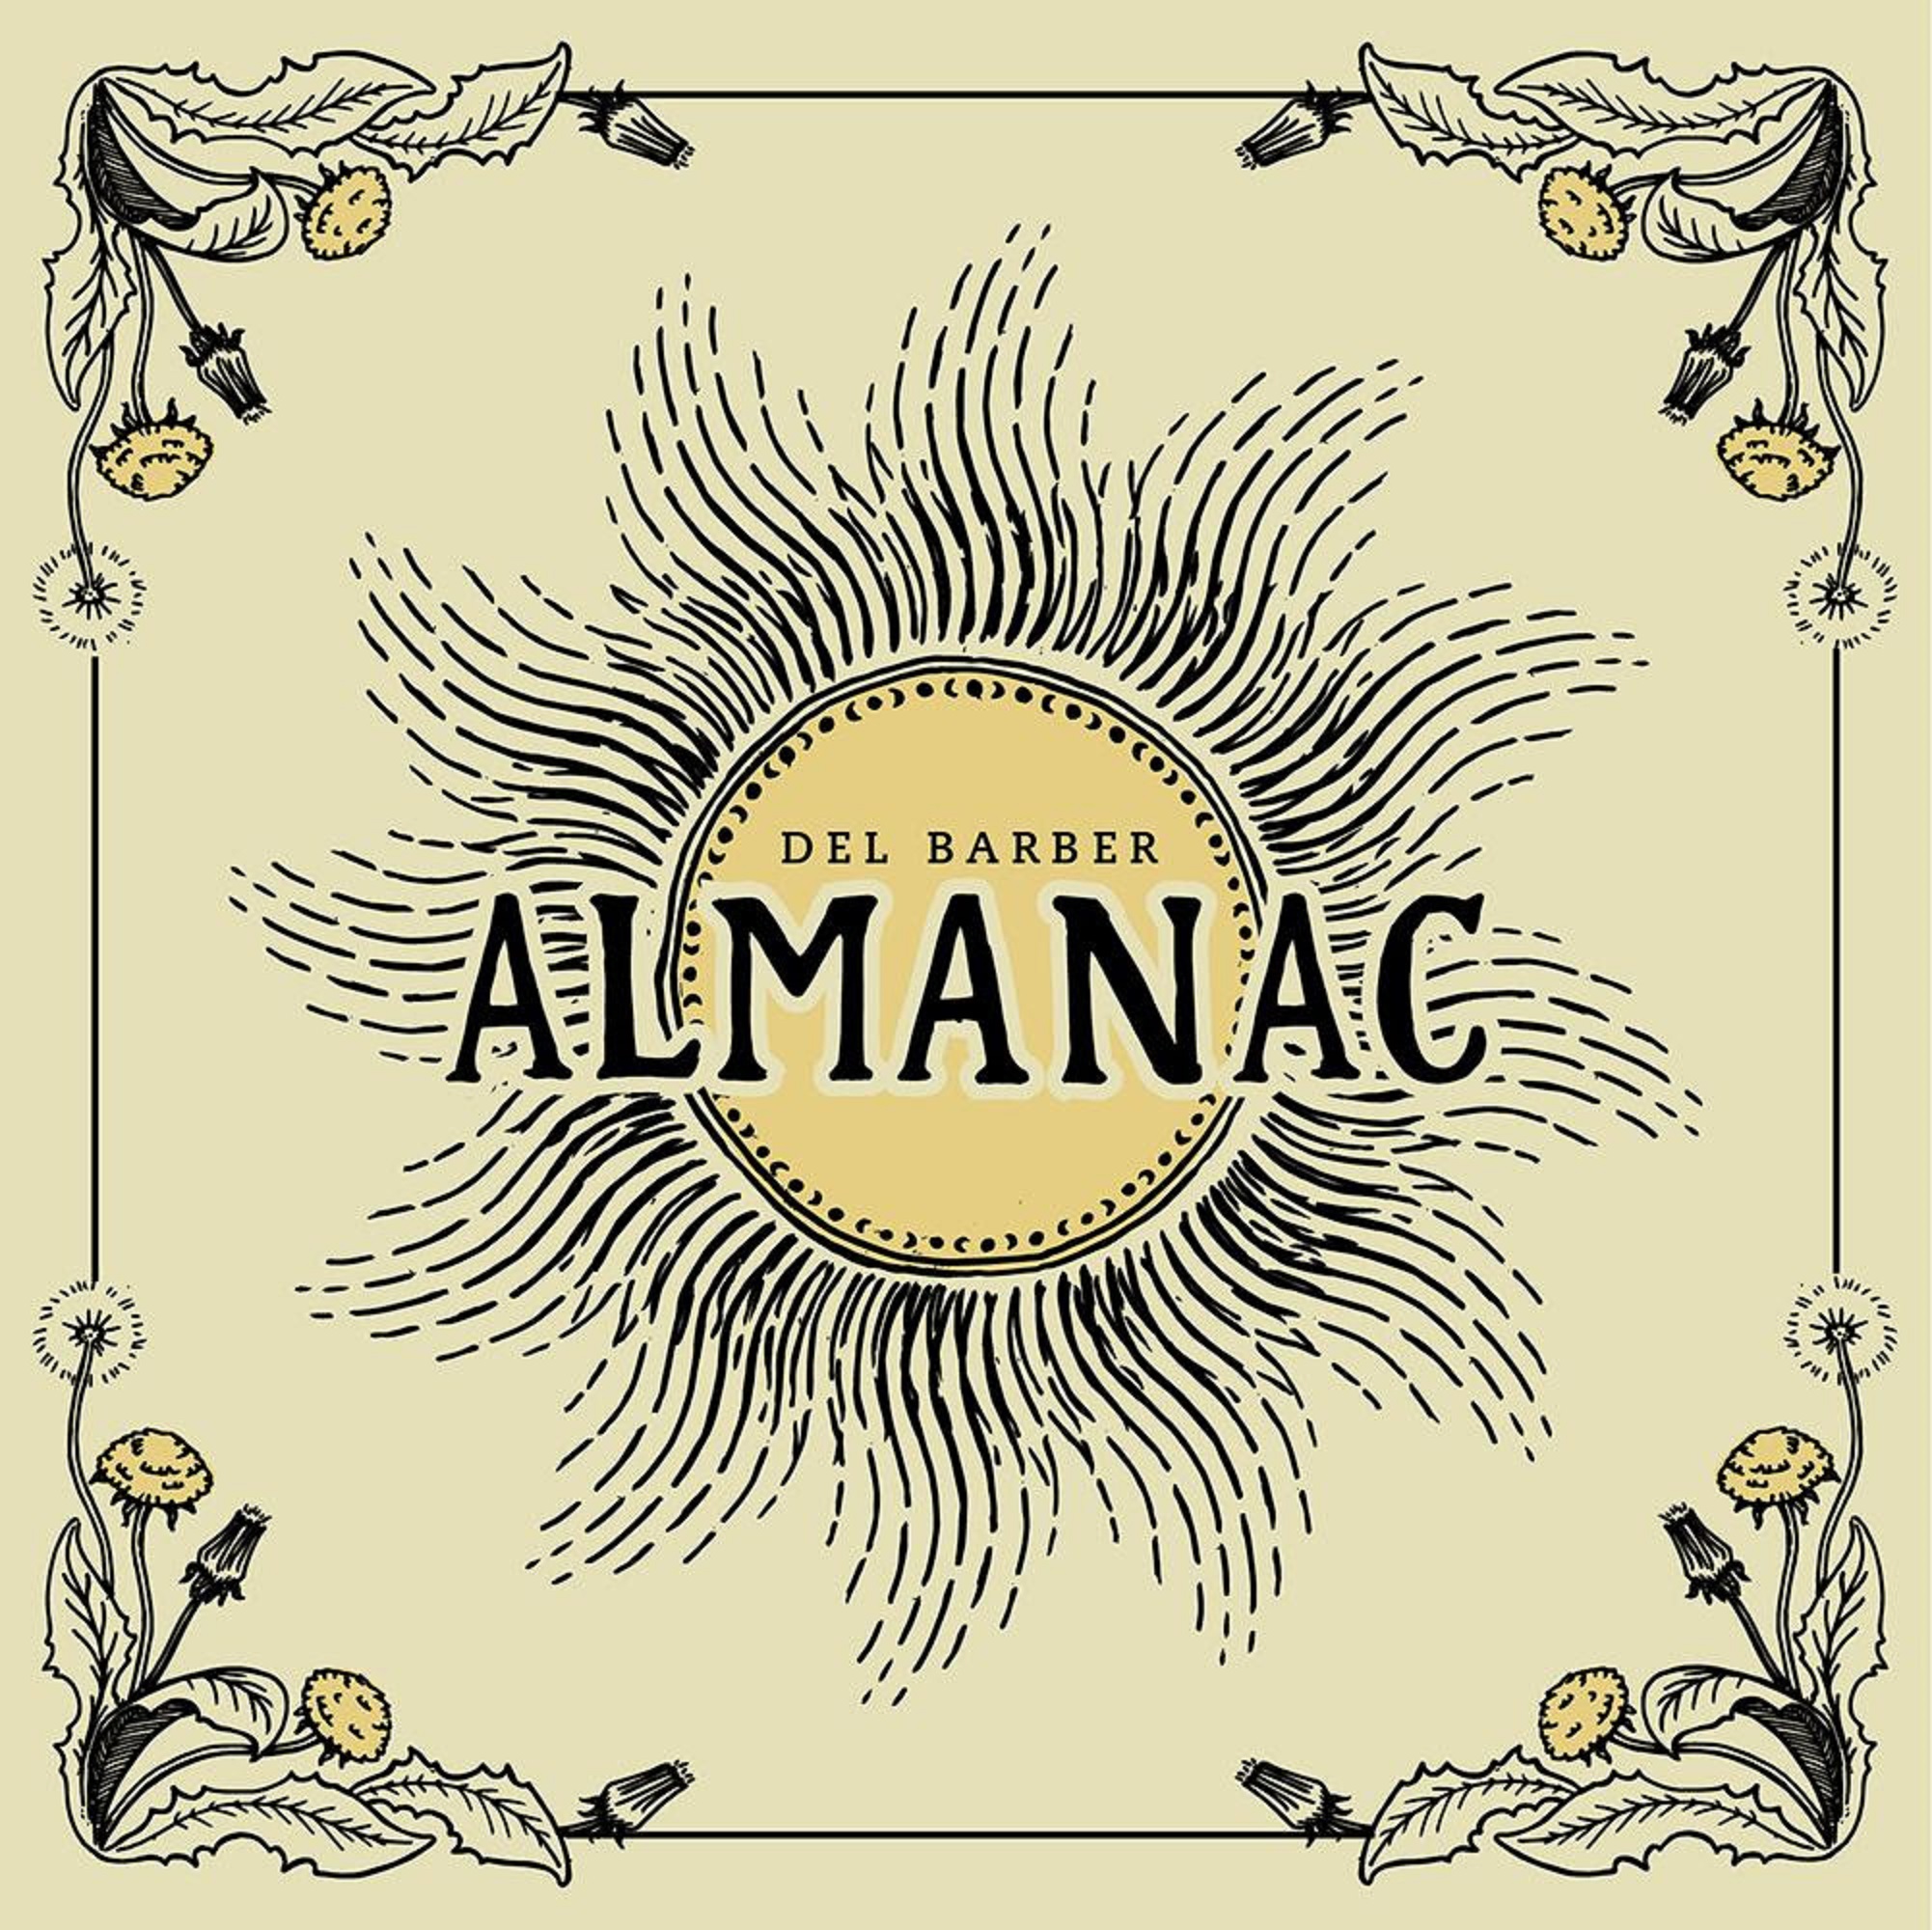 Del Barber Shines on New LP "Almanac" – Out Today via acronym Records